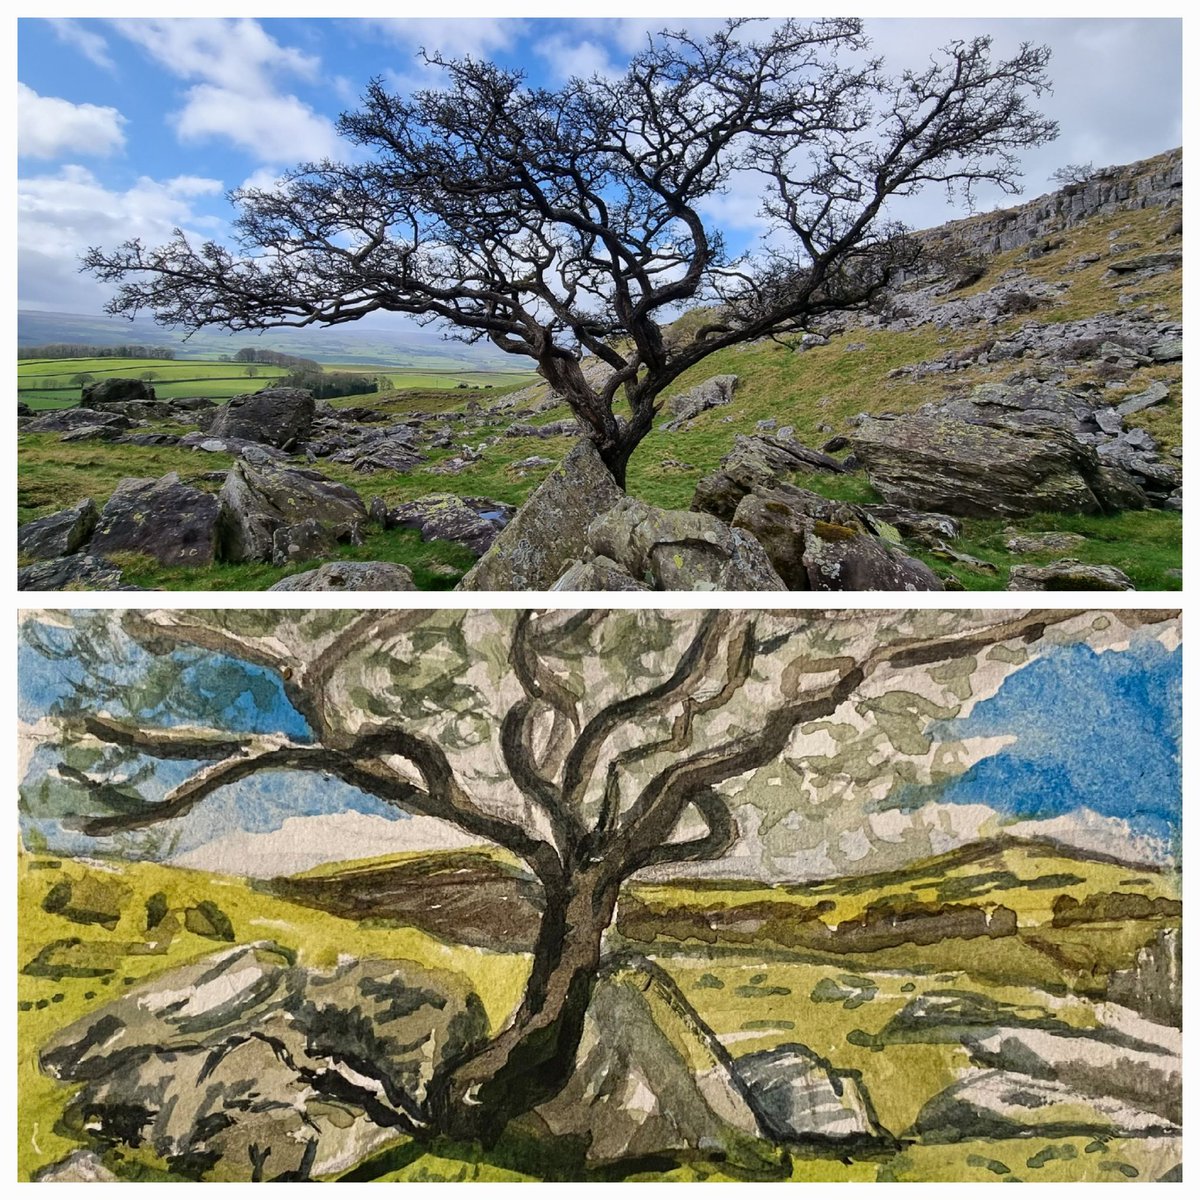 Still erratic after all these years.... Back at one of my favourite trees...a hawthorn at Norber Erratics Painted a few years ago as part of her wonderful #apaintingaday little books by @MichelleU_Wood